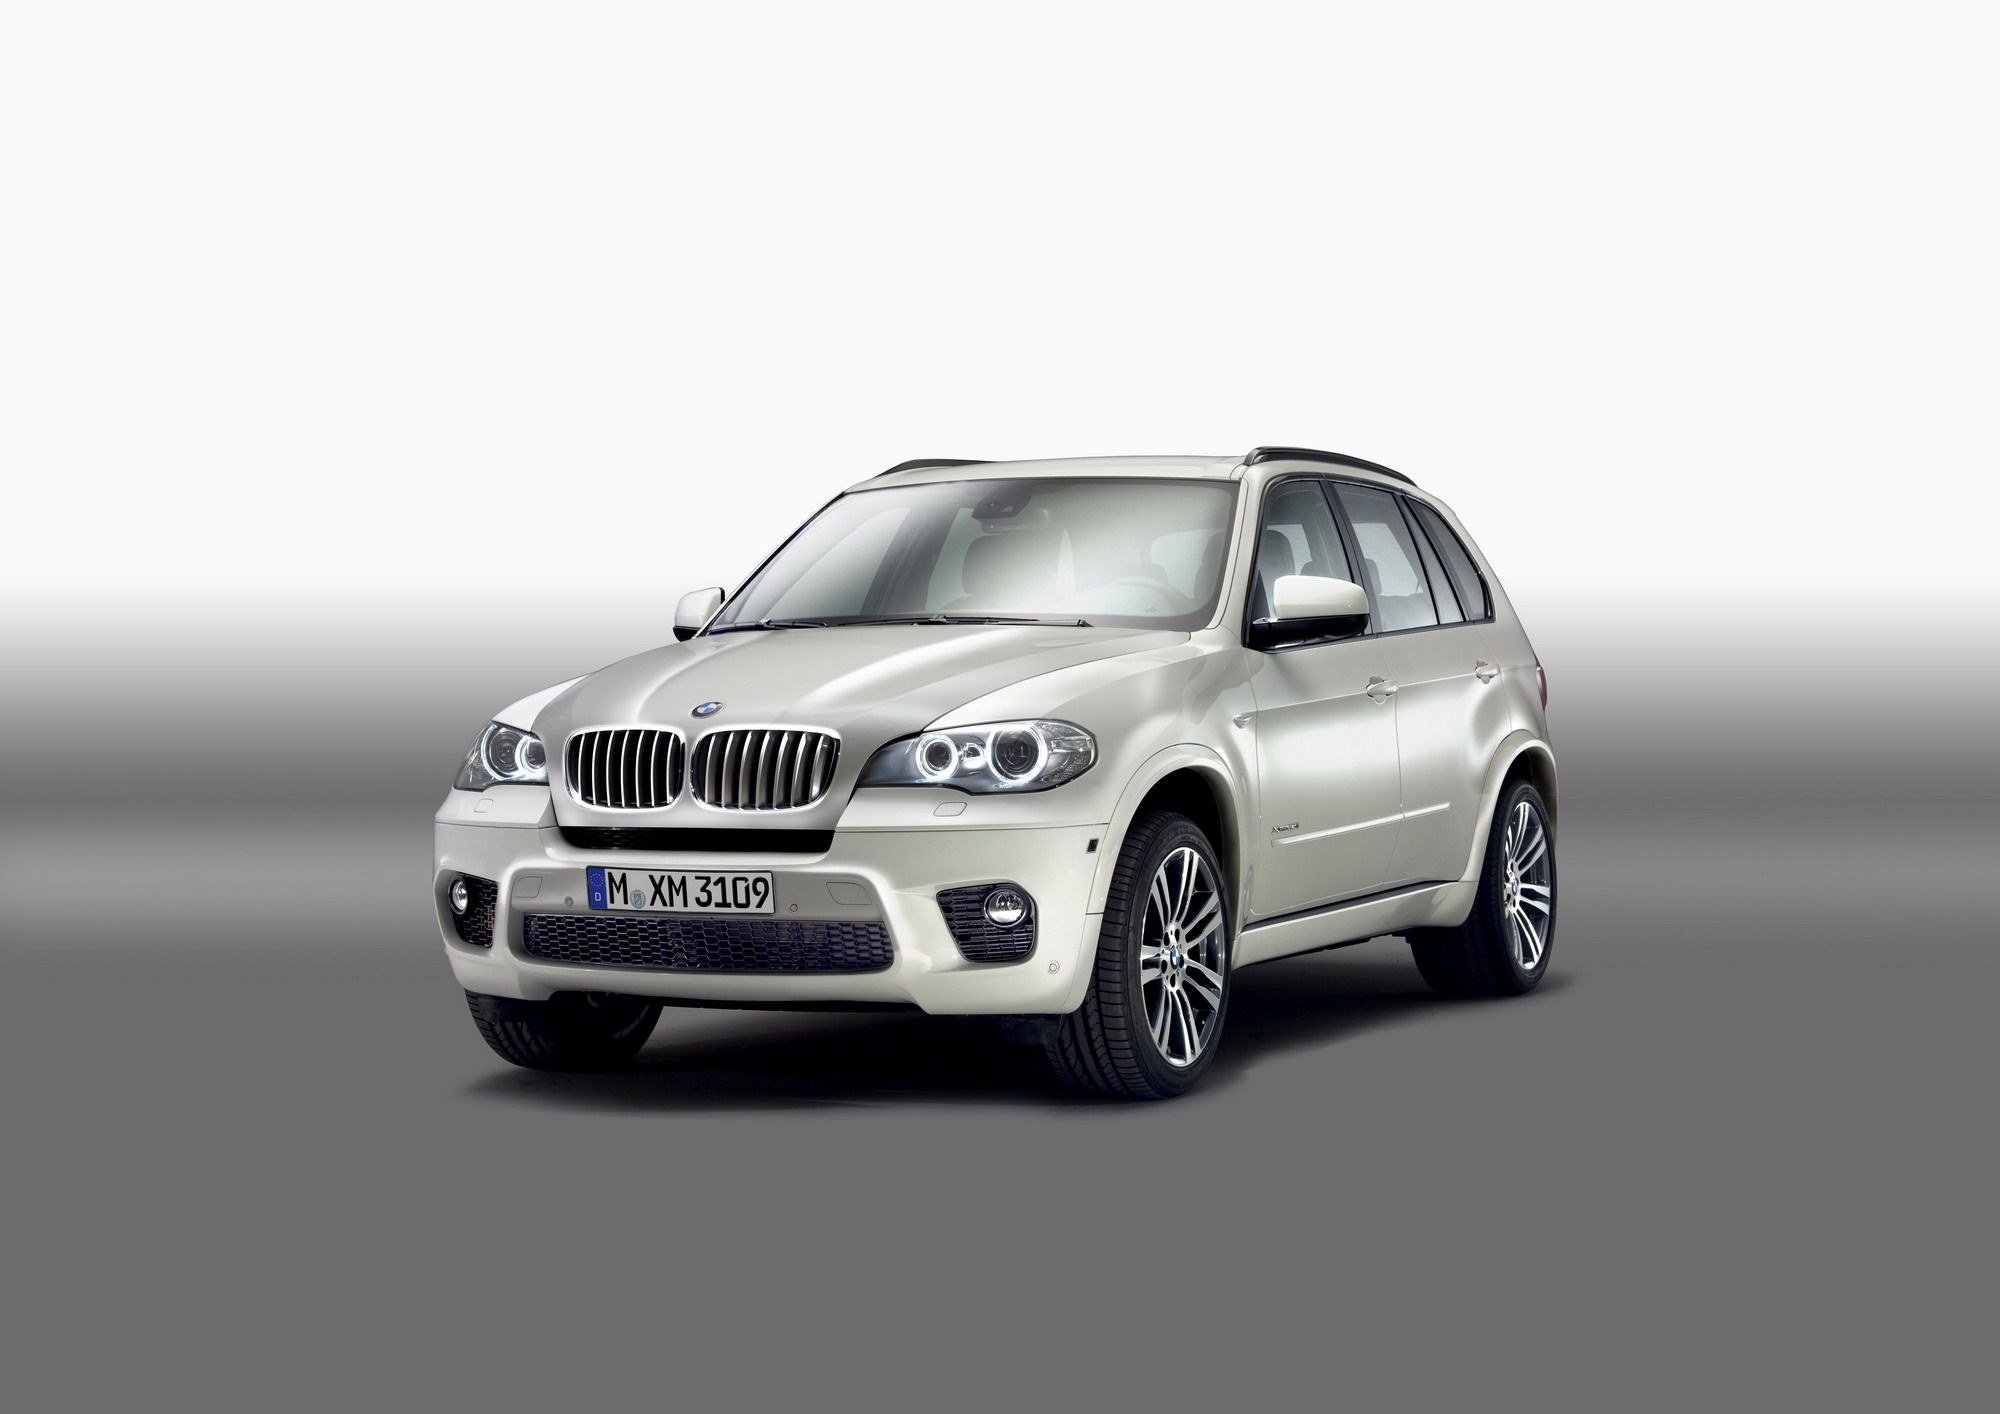 2010 BMW X5 with M Sports package